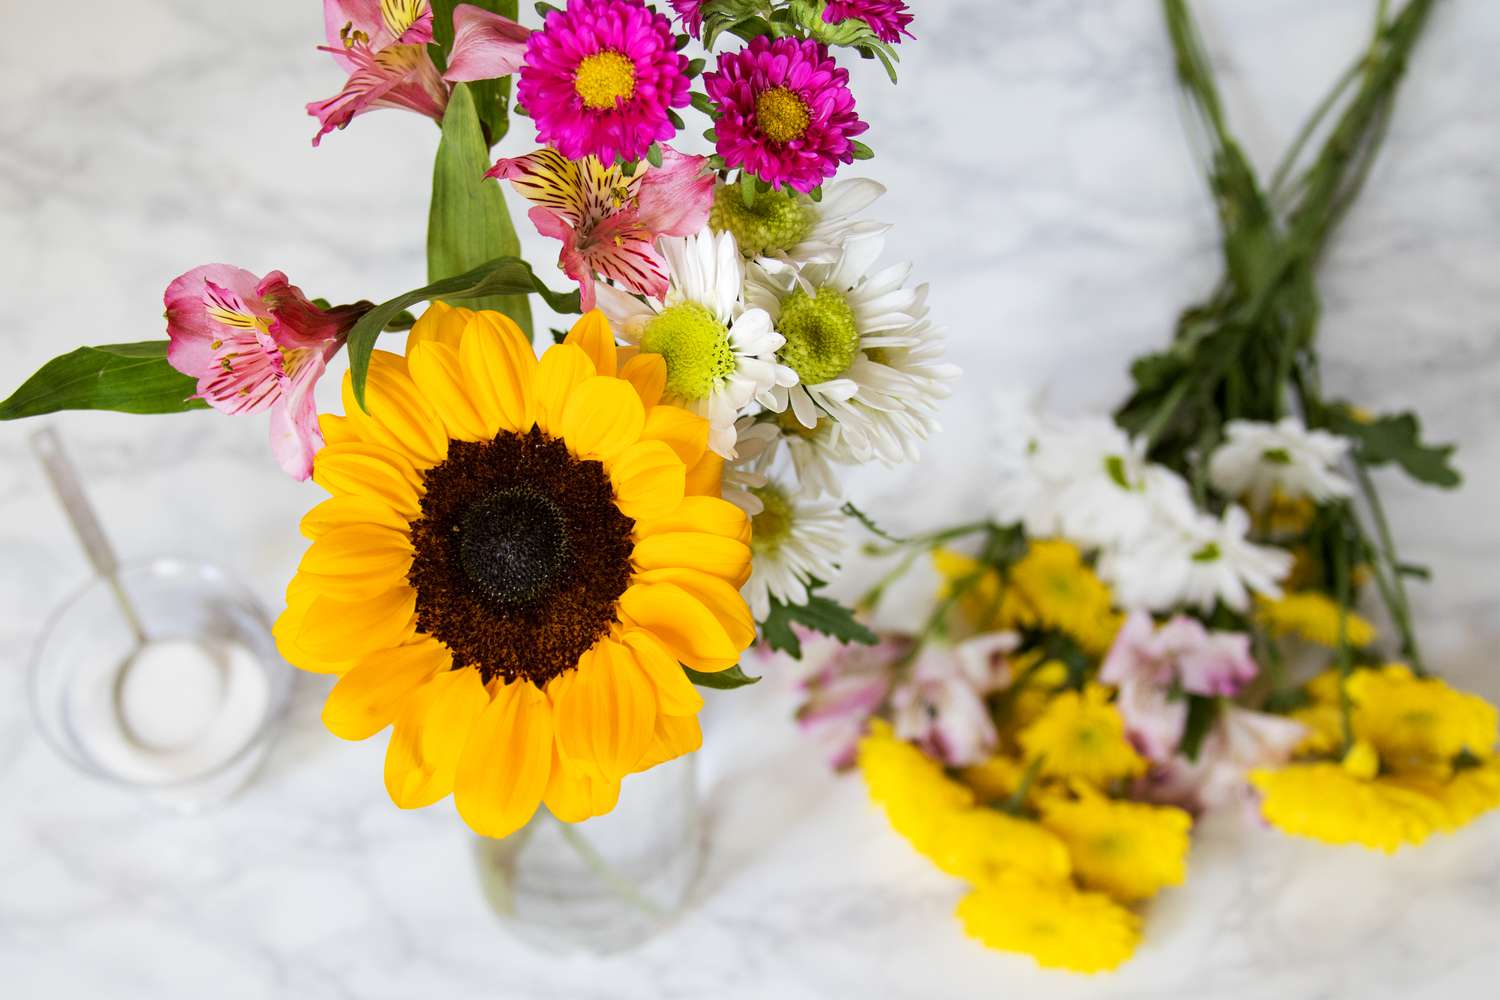 How To Revive Cut Sunflowers